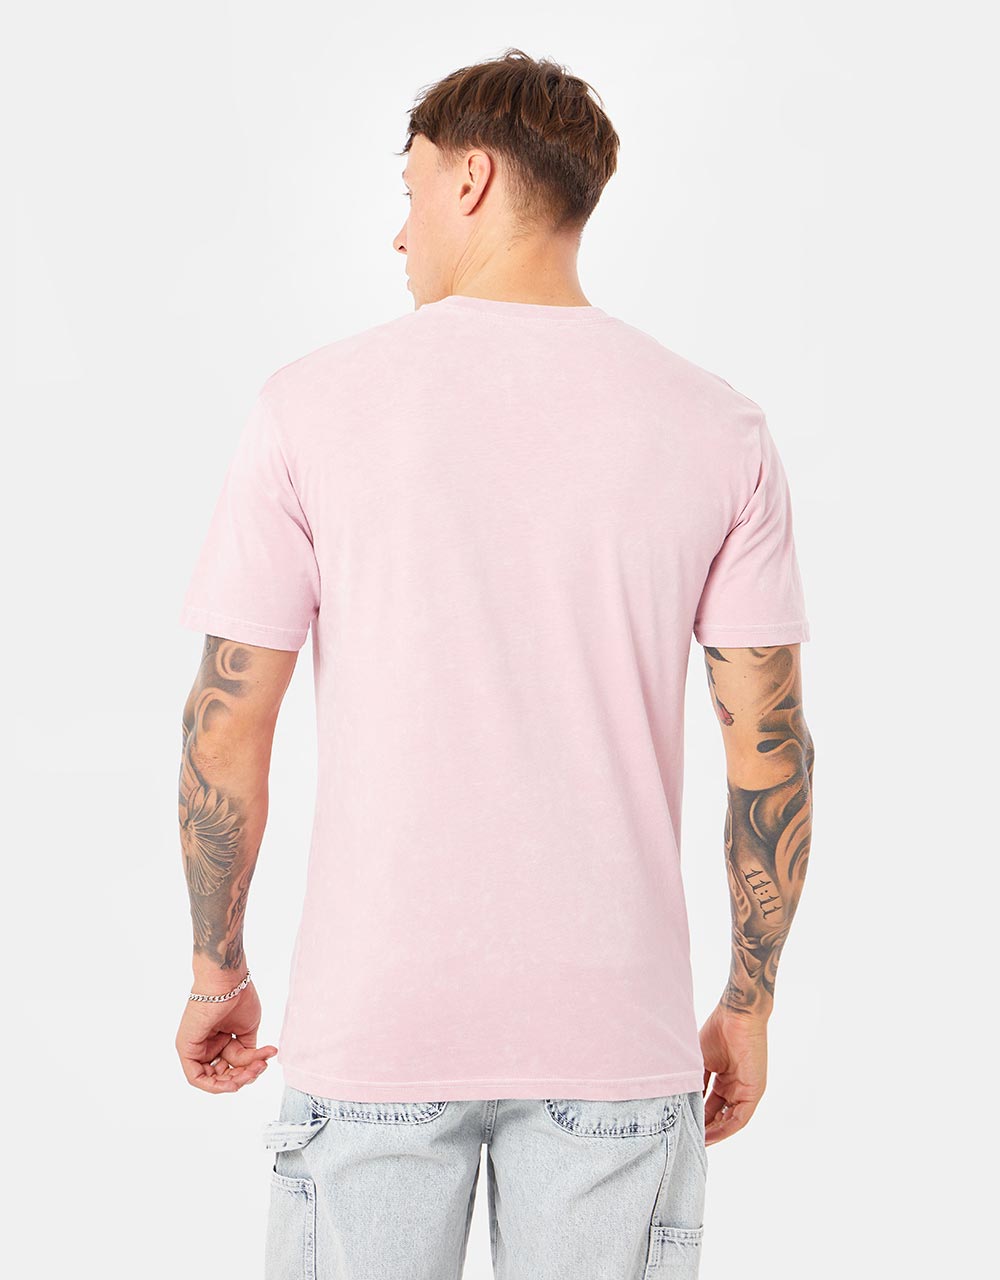 Route One Organic Constrast Stitch T-Shirt - Pale Blossom